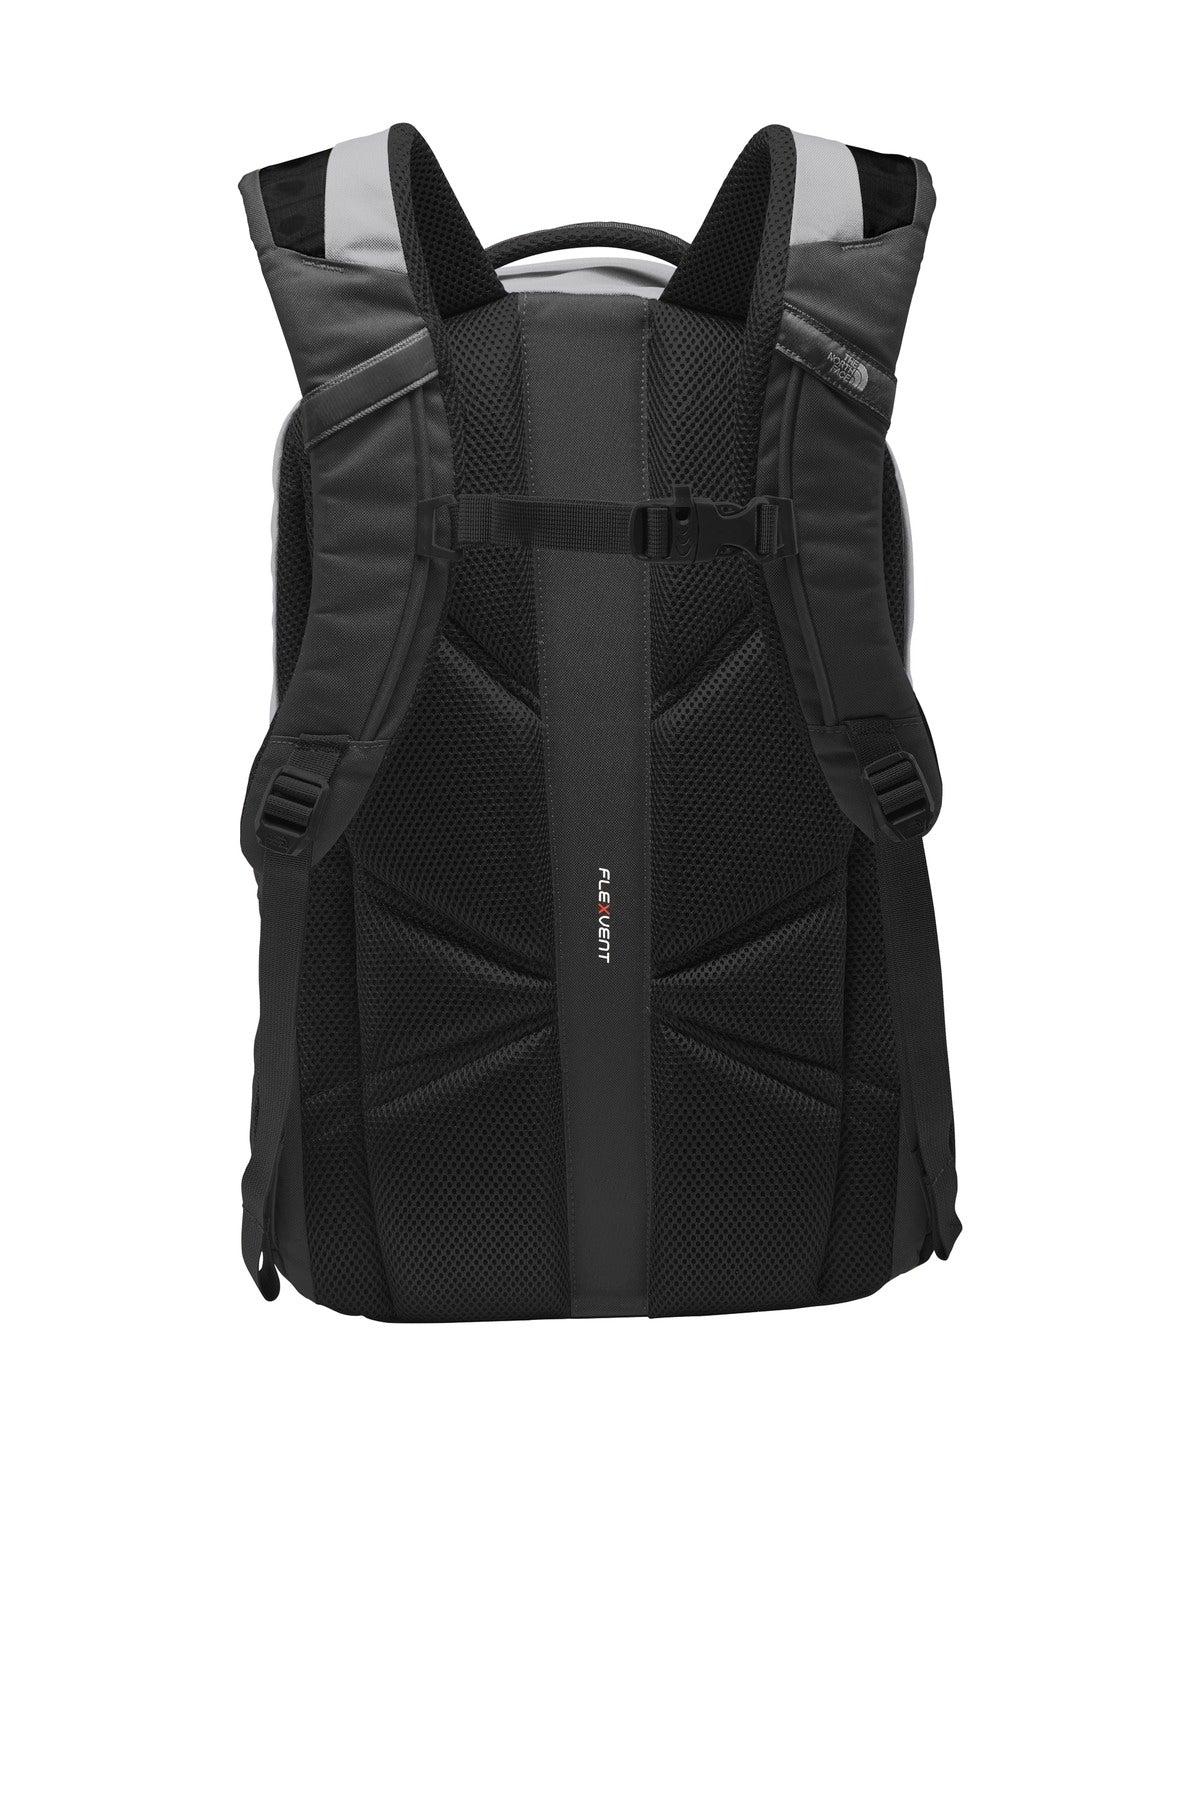 The North Face ® Groundwork Backpack. NF0A3KX6 - DFW Impression